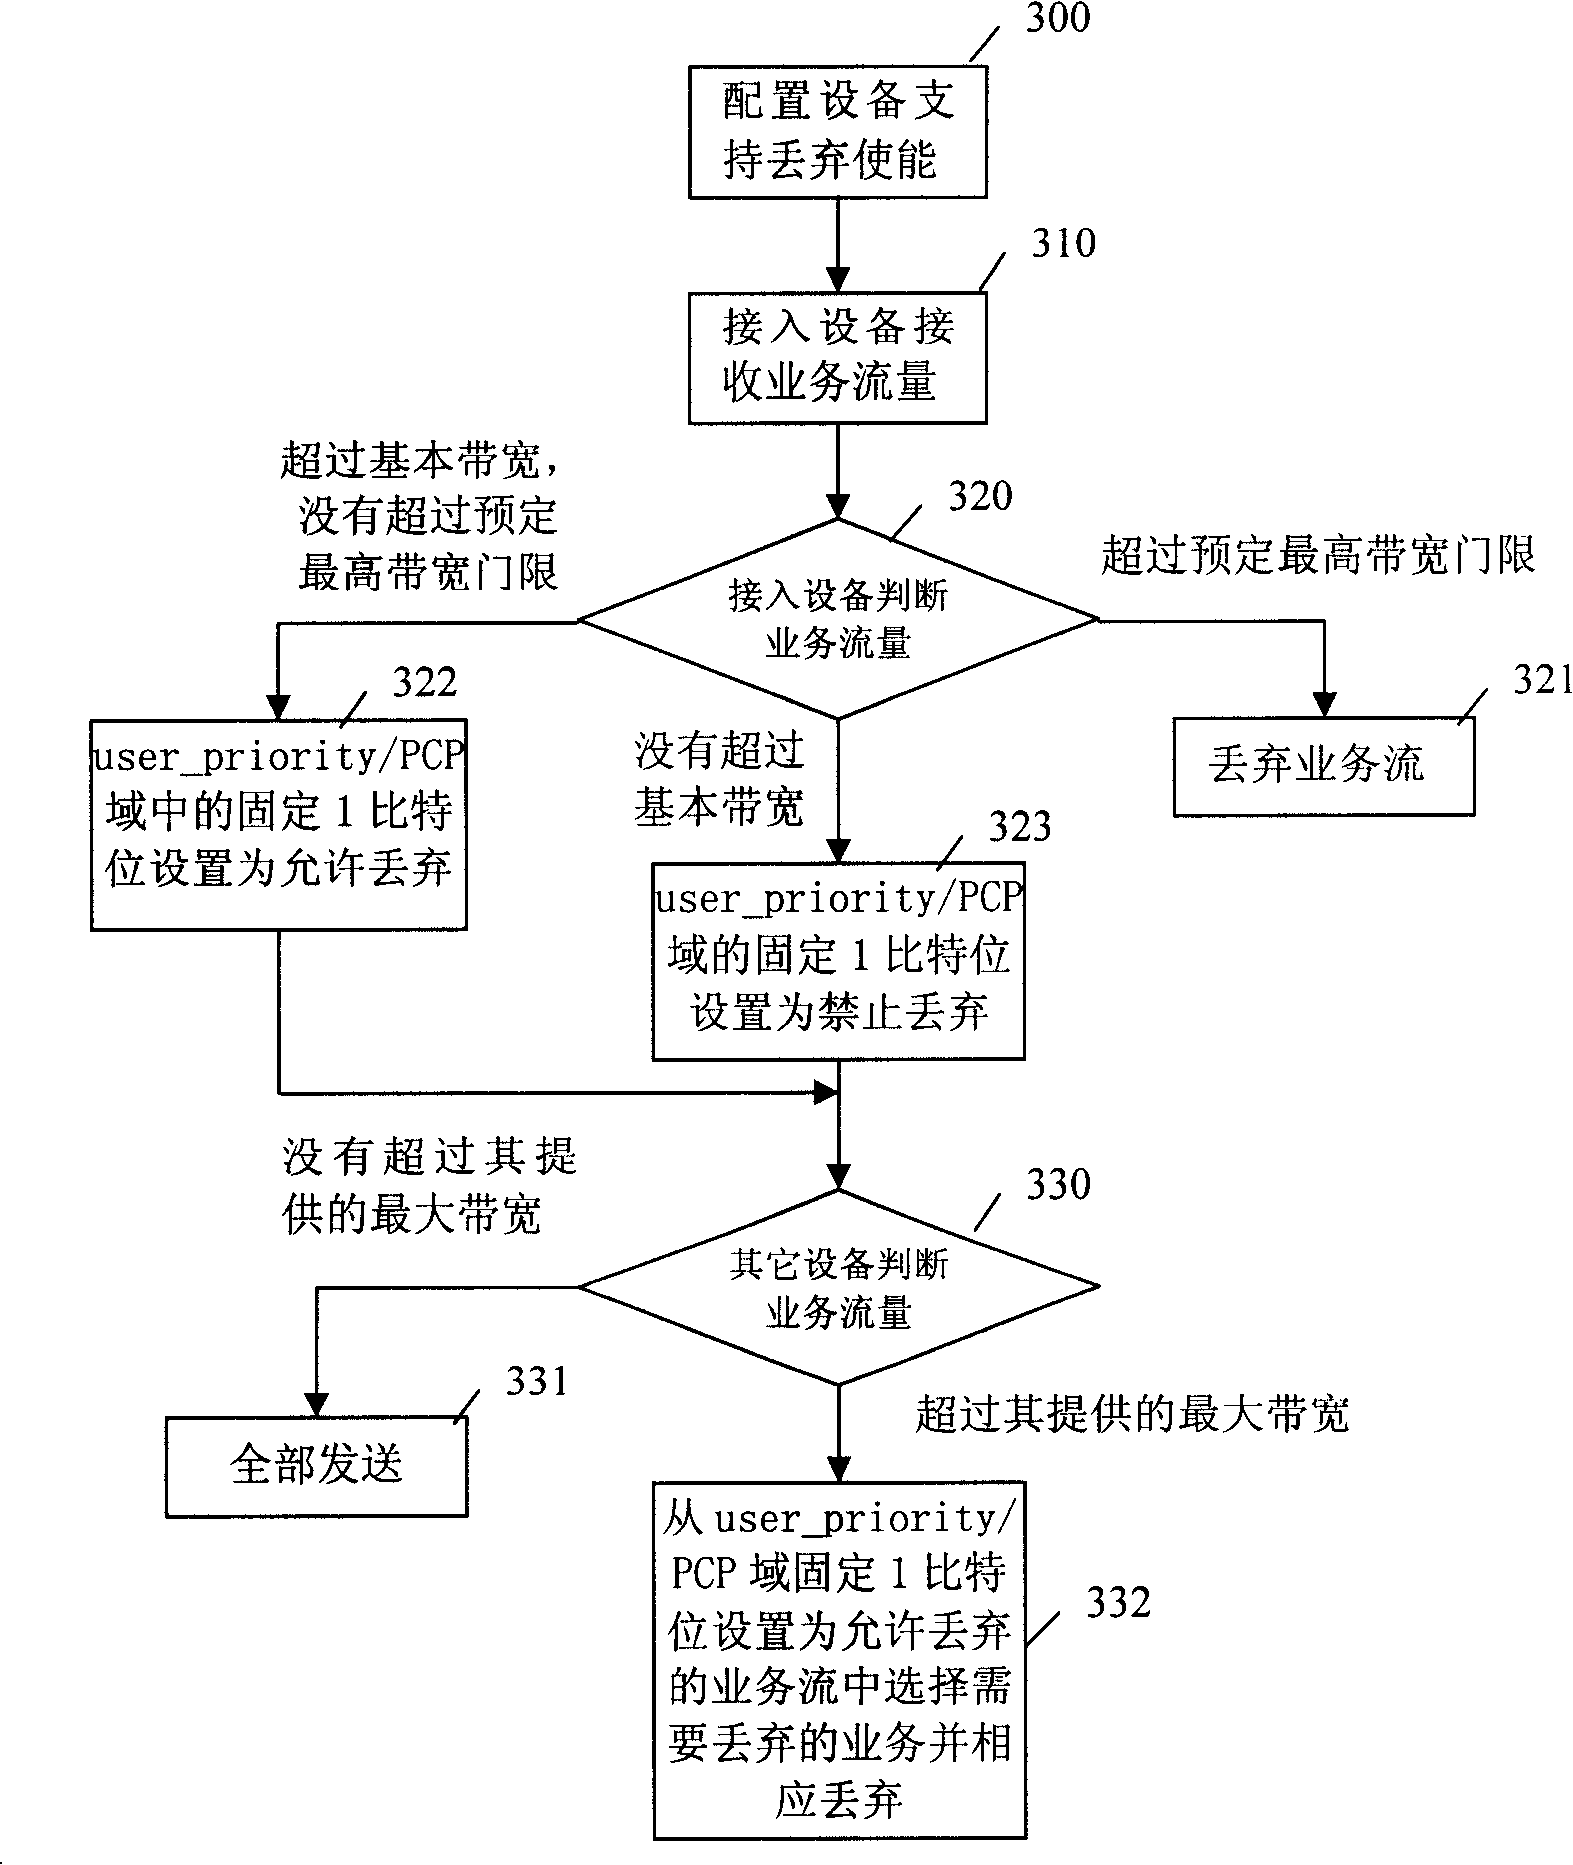 Method for realizing differentiated service model QoS in Ethernet